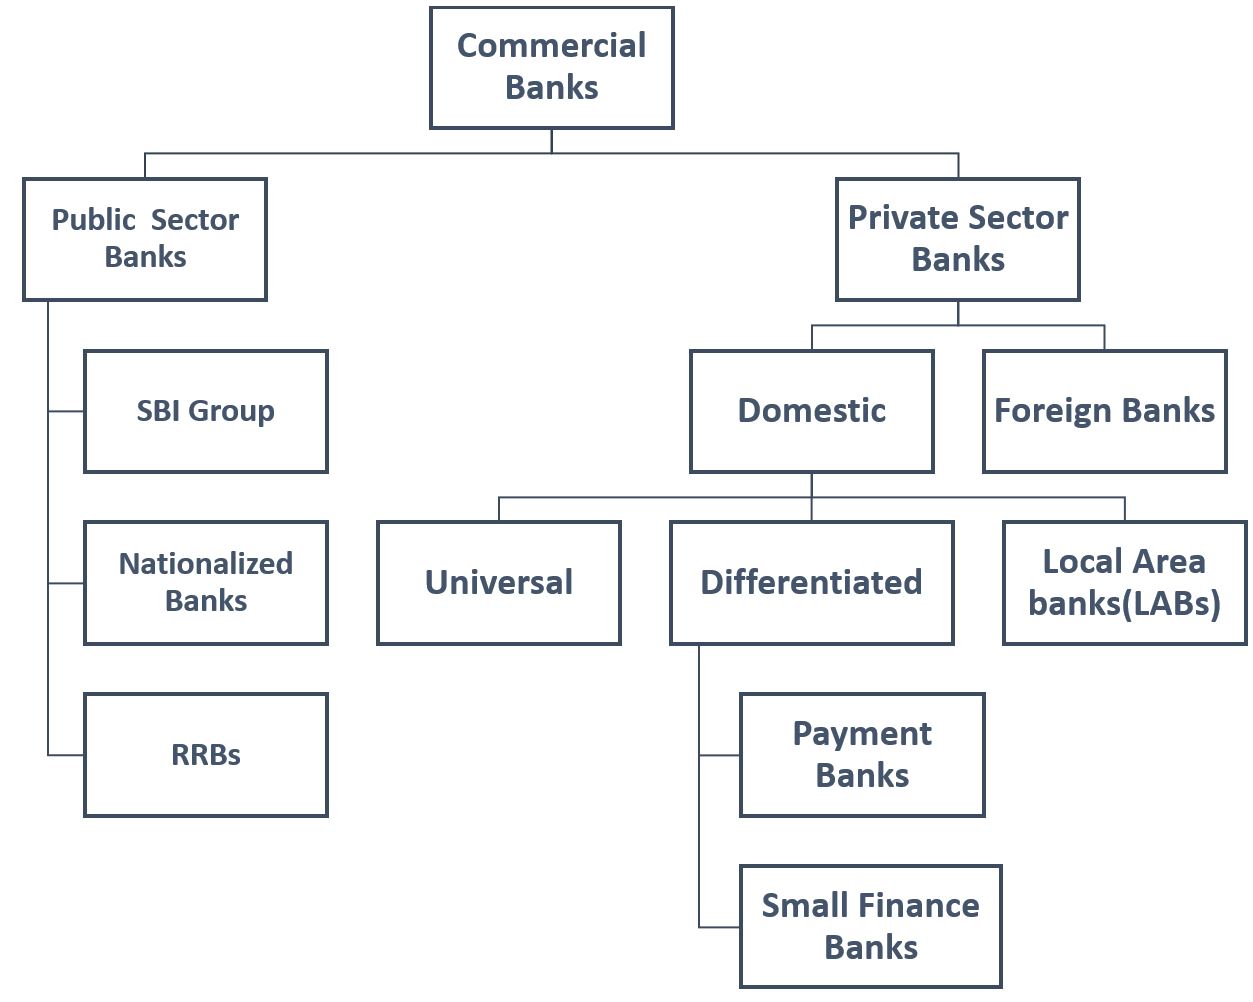 What Are the Different Types of Banks?